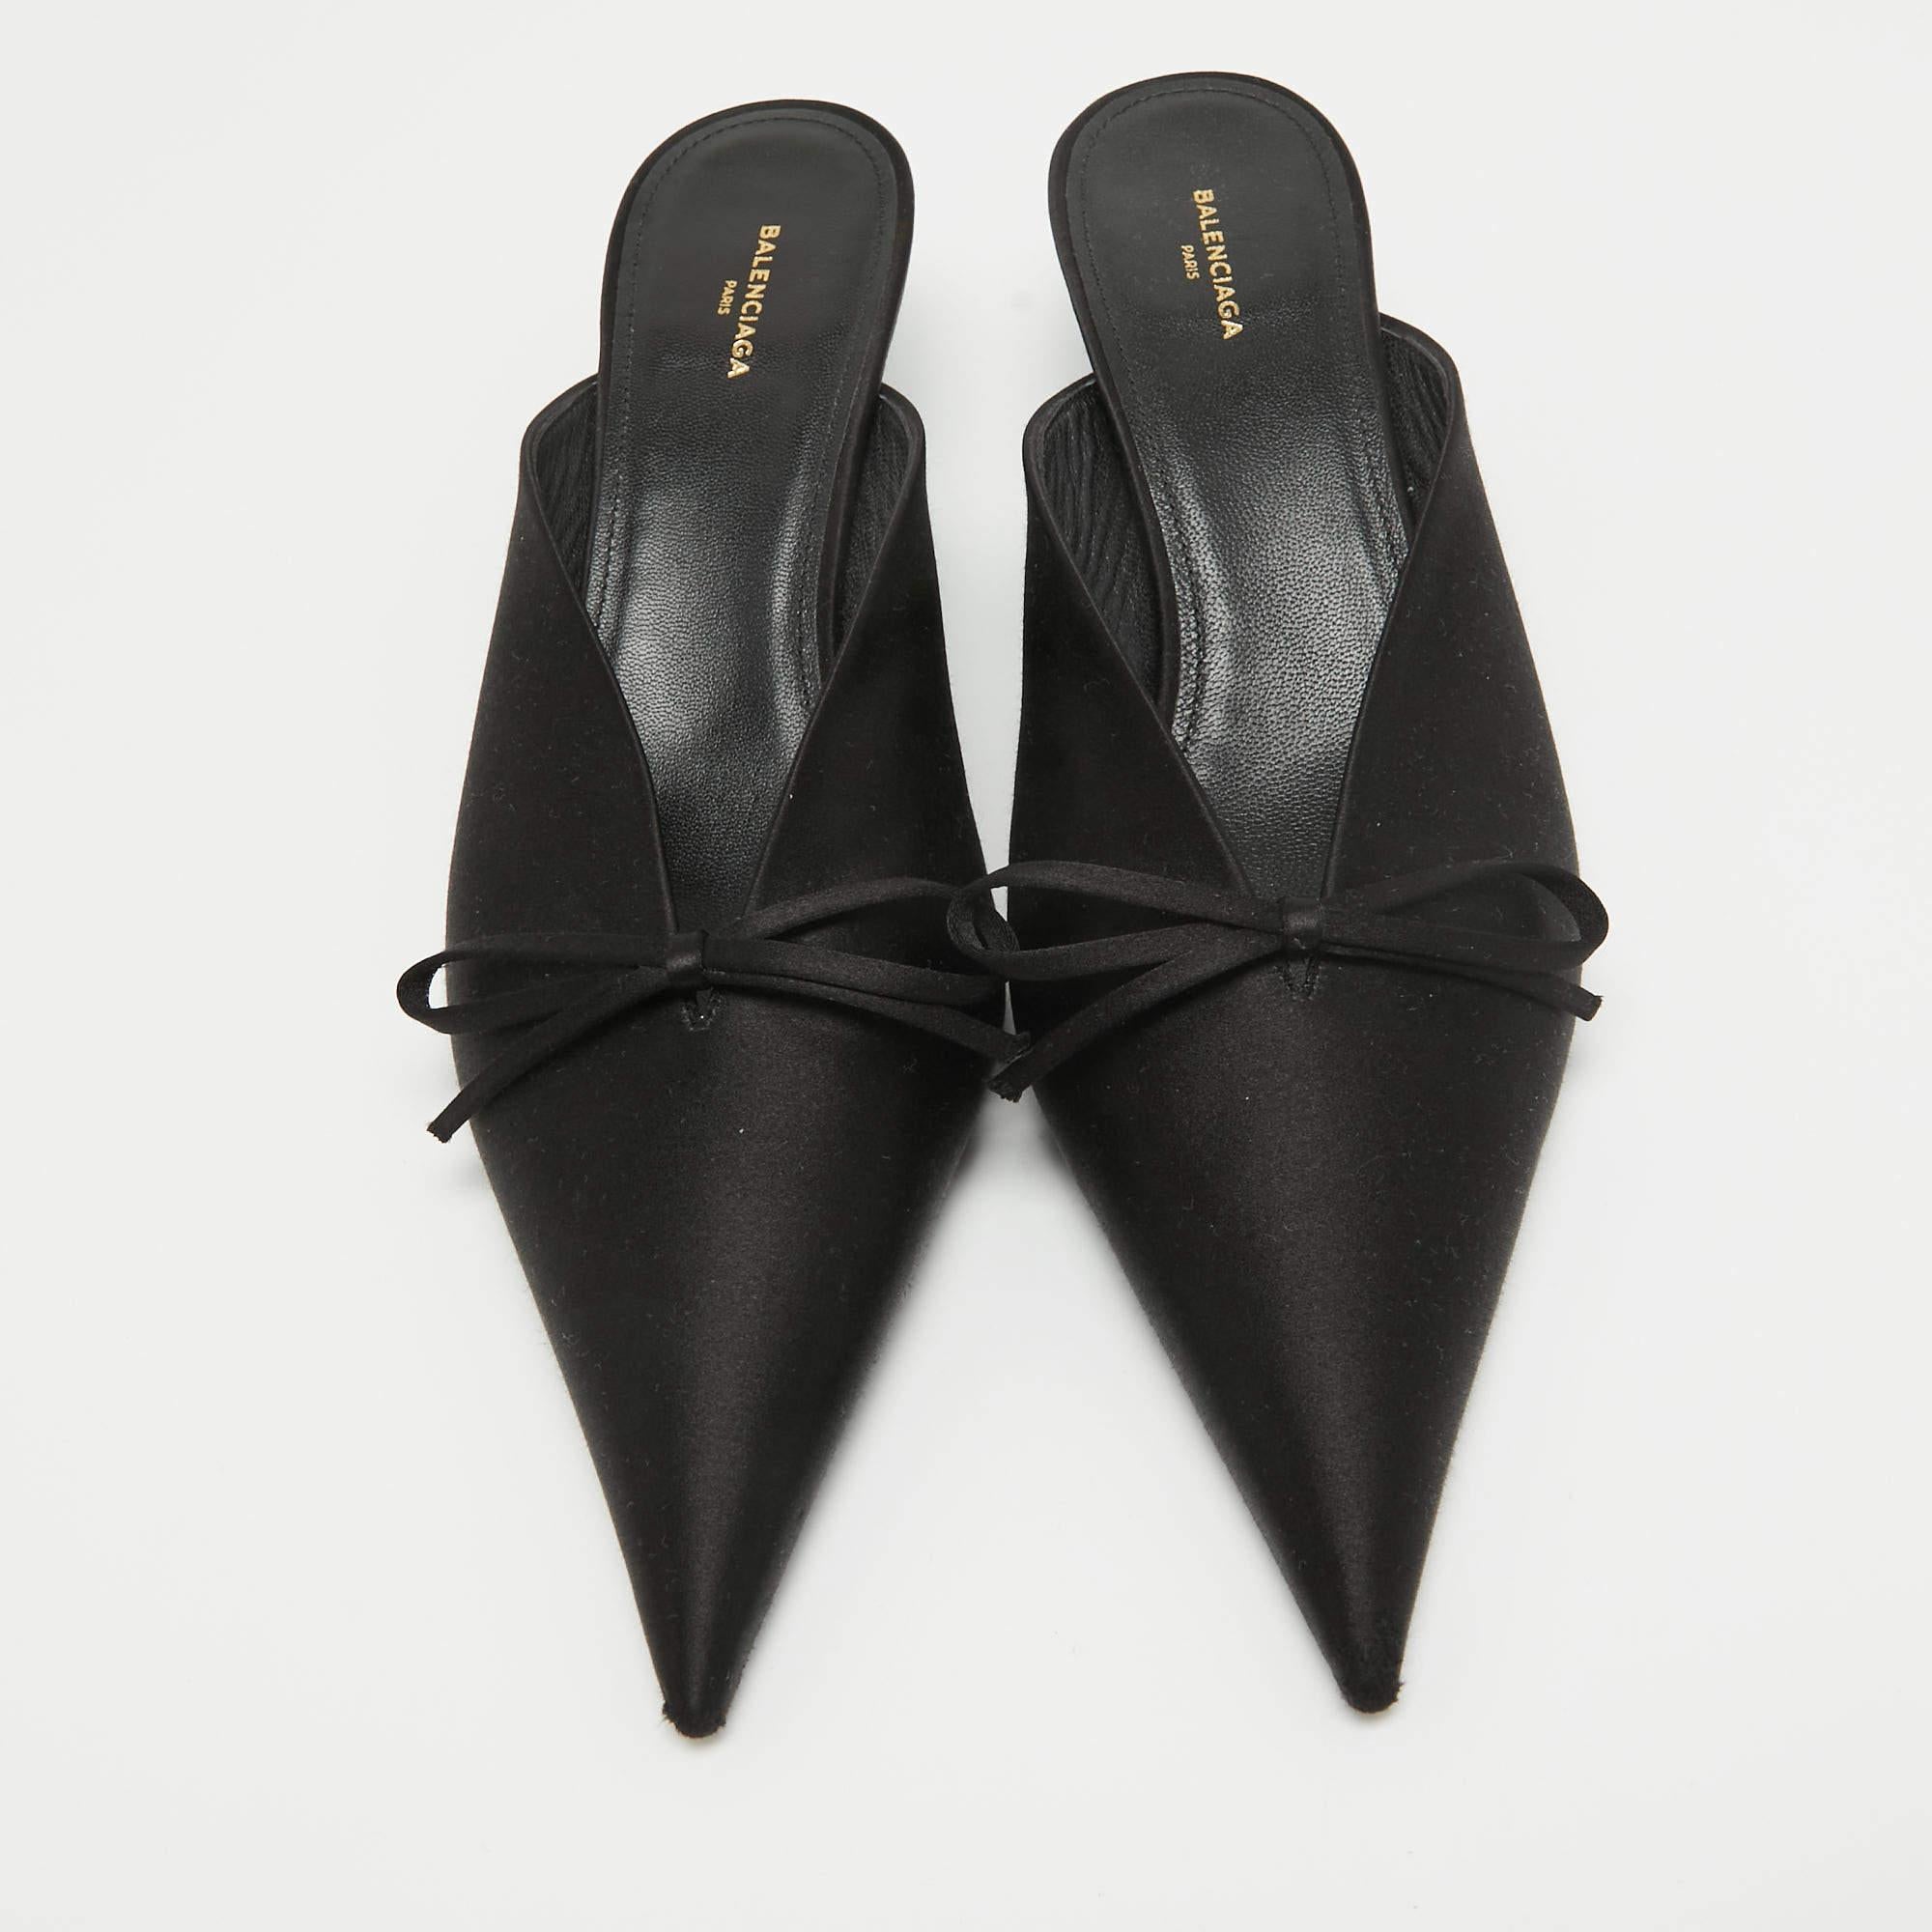 Complement your well-put-together outfit with these authentic Balenciaga kitten heels. Timeless and classy, they have an amazing construction for enduring quality and comfortable fit.

Includes
Original Dustbag